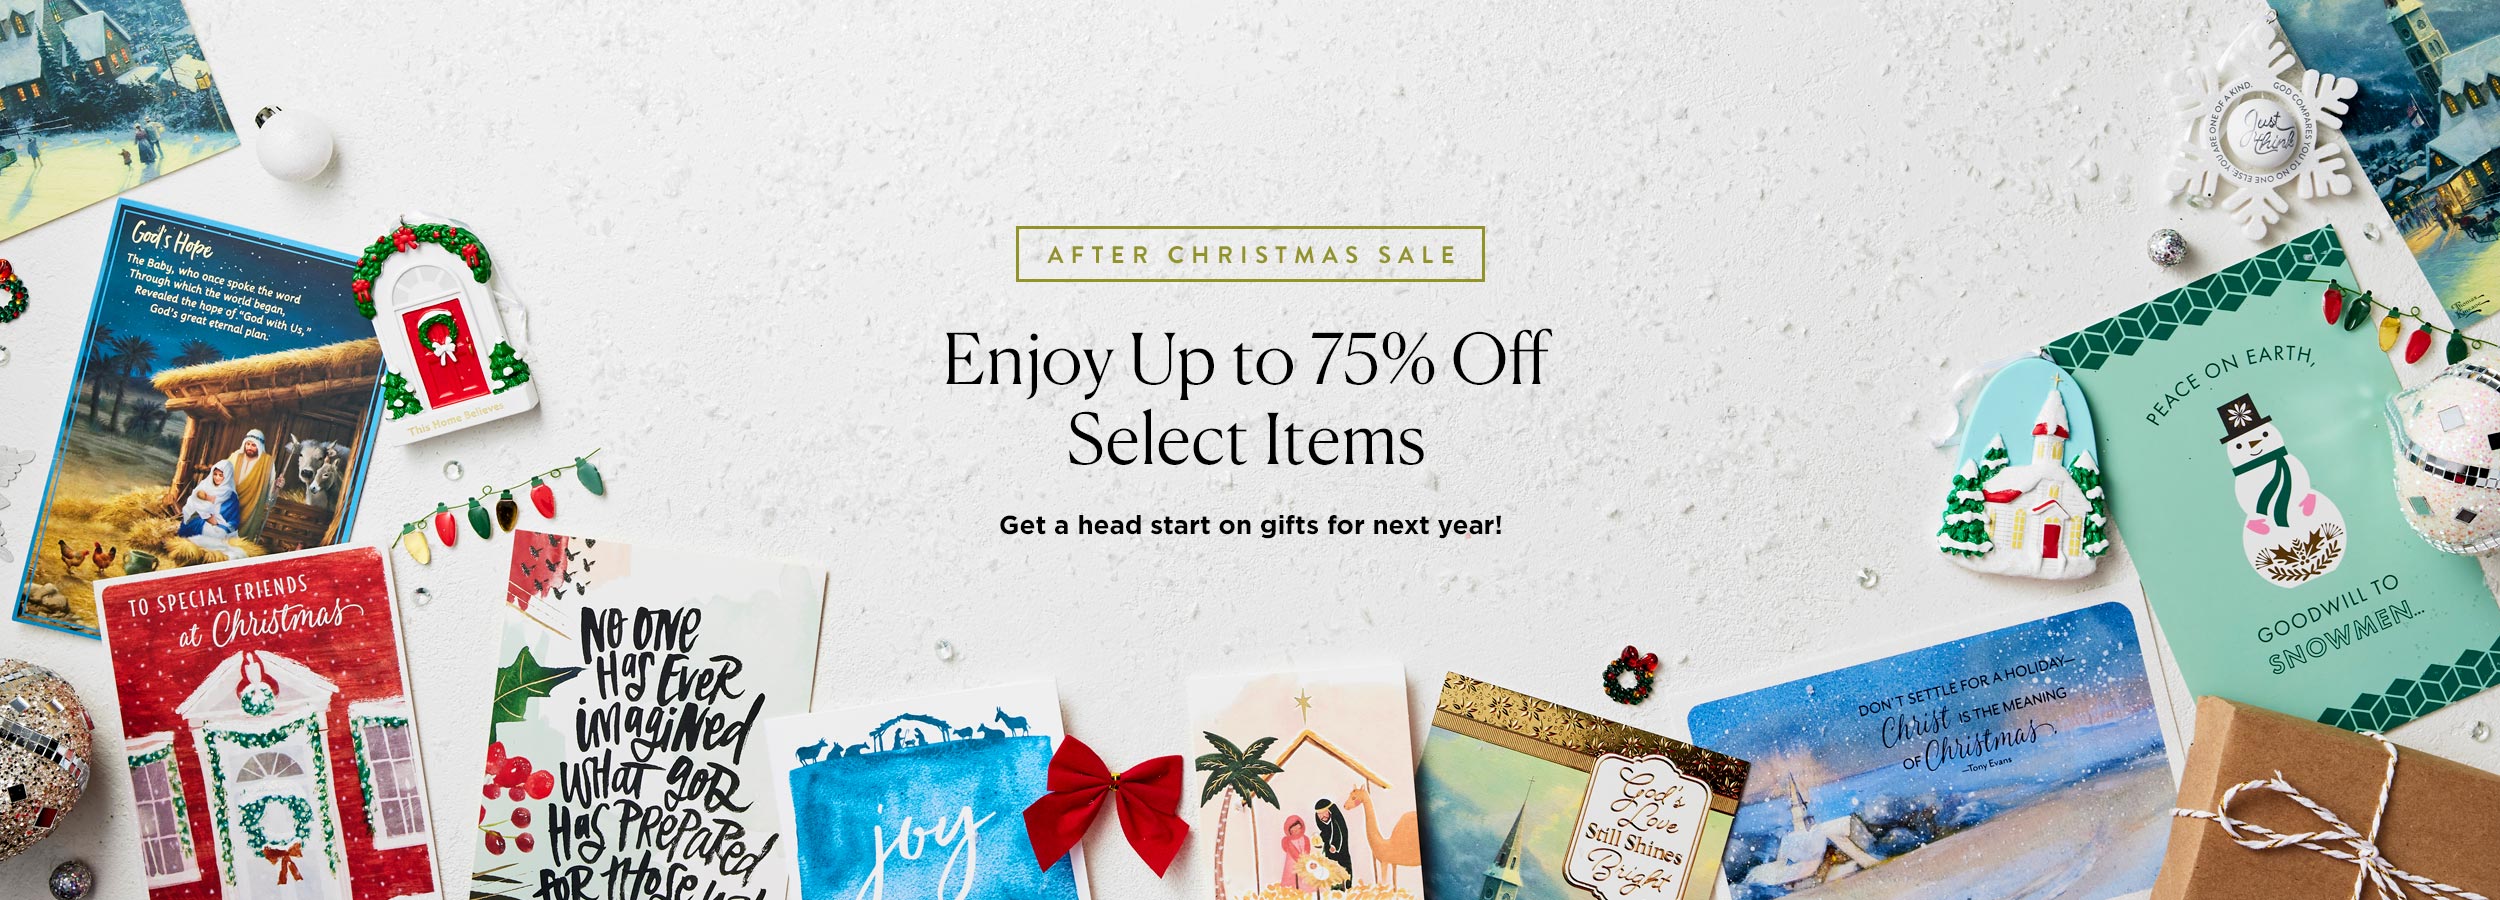 After Christmas Sale: Up to 75% Off Select Items